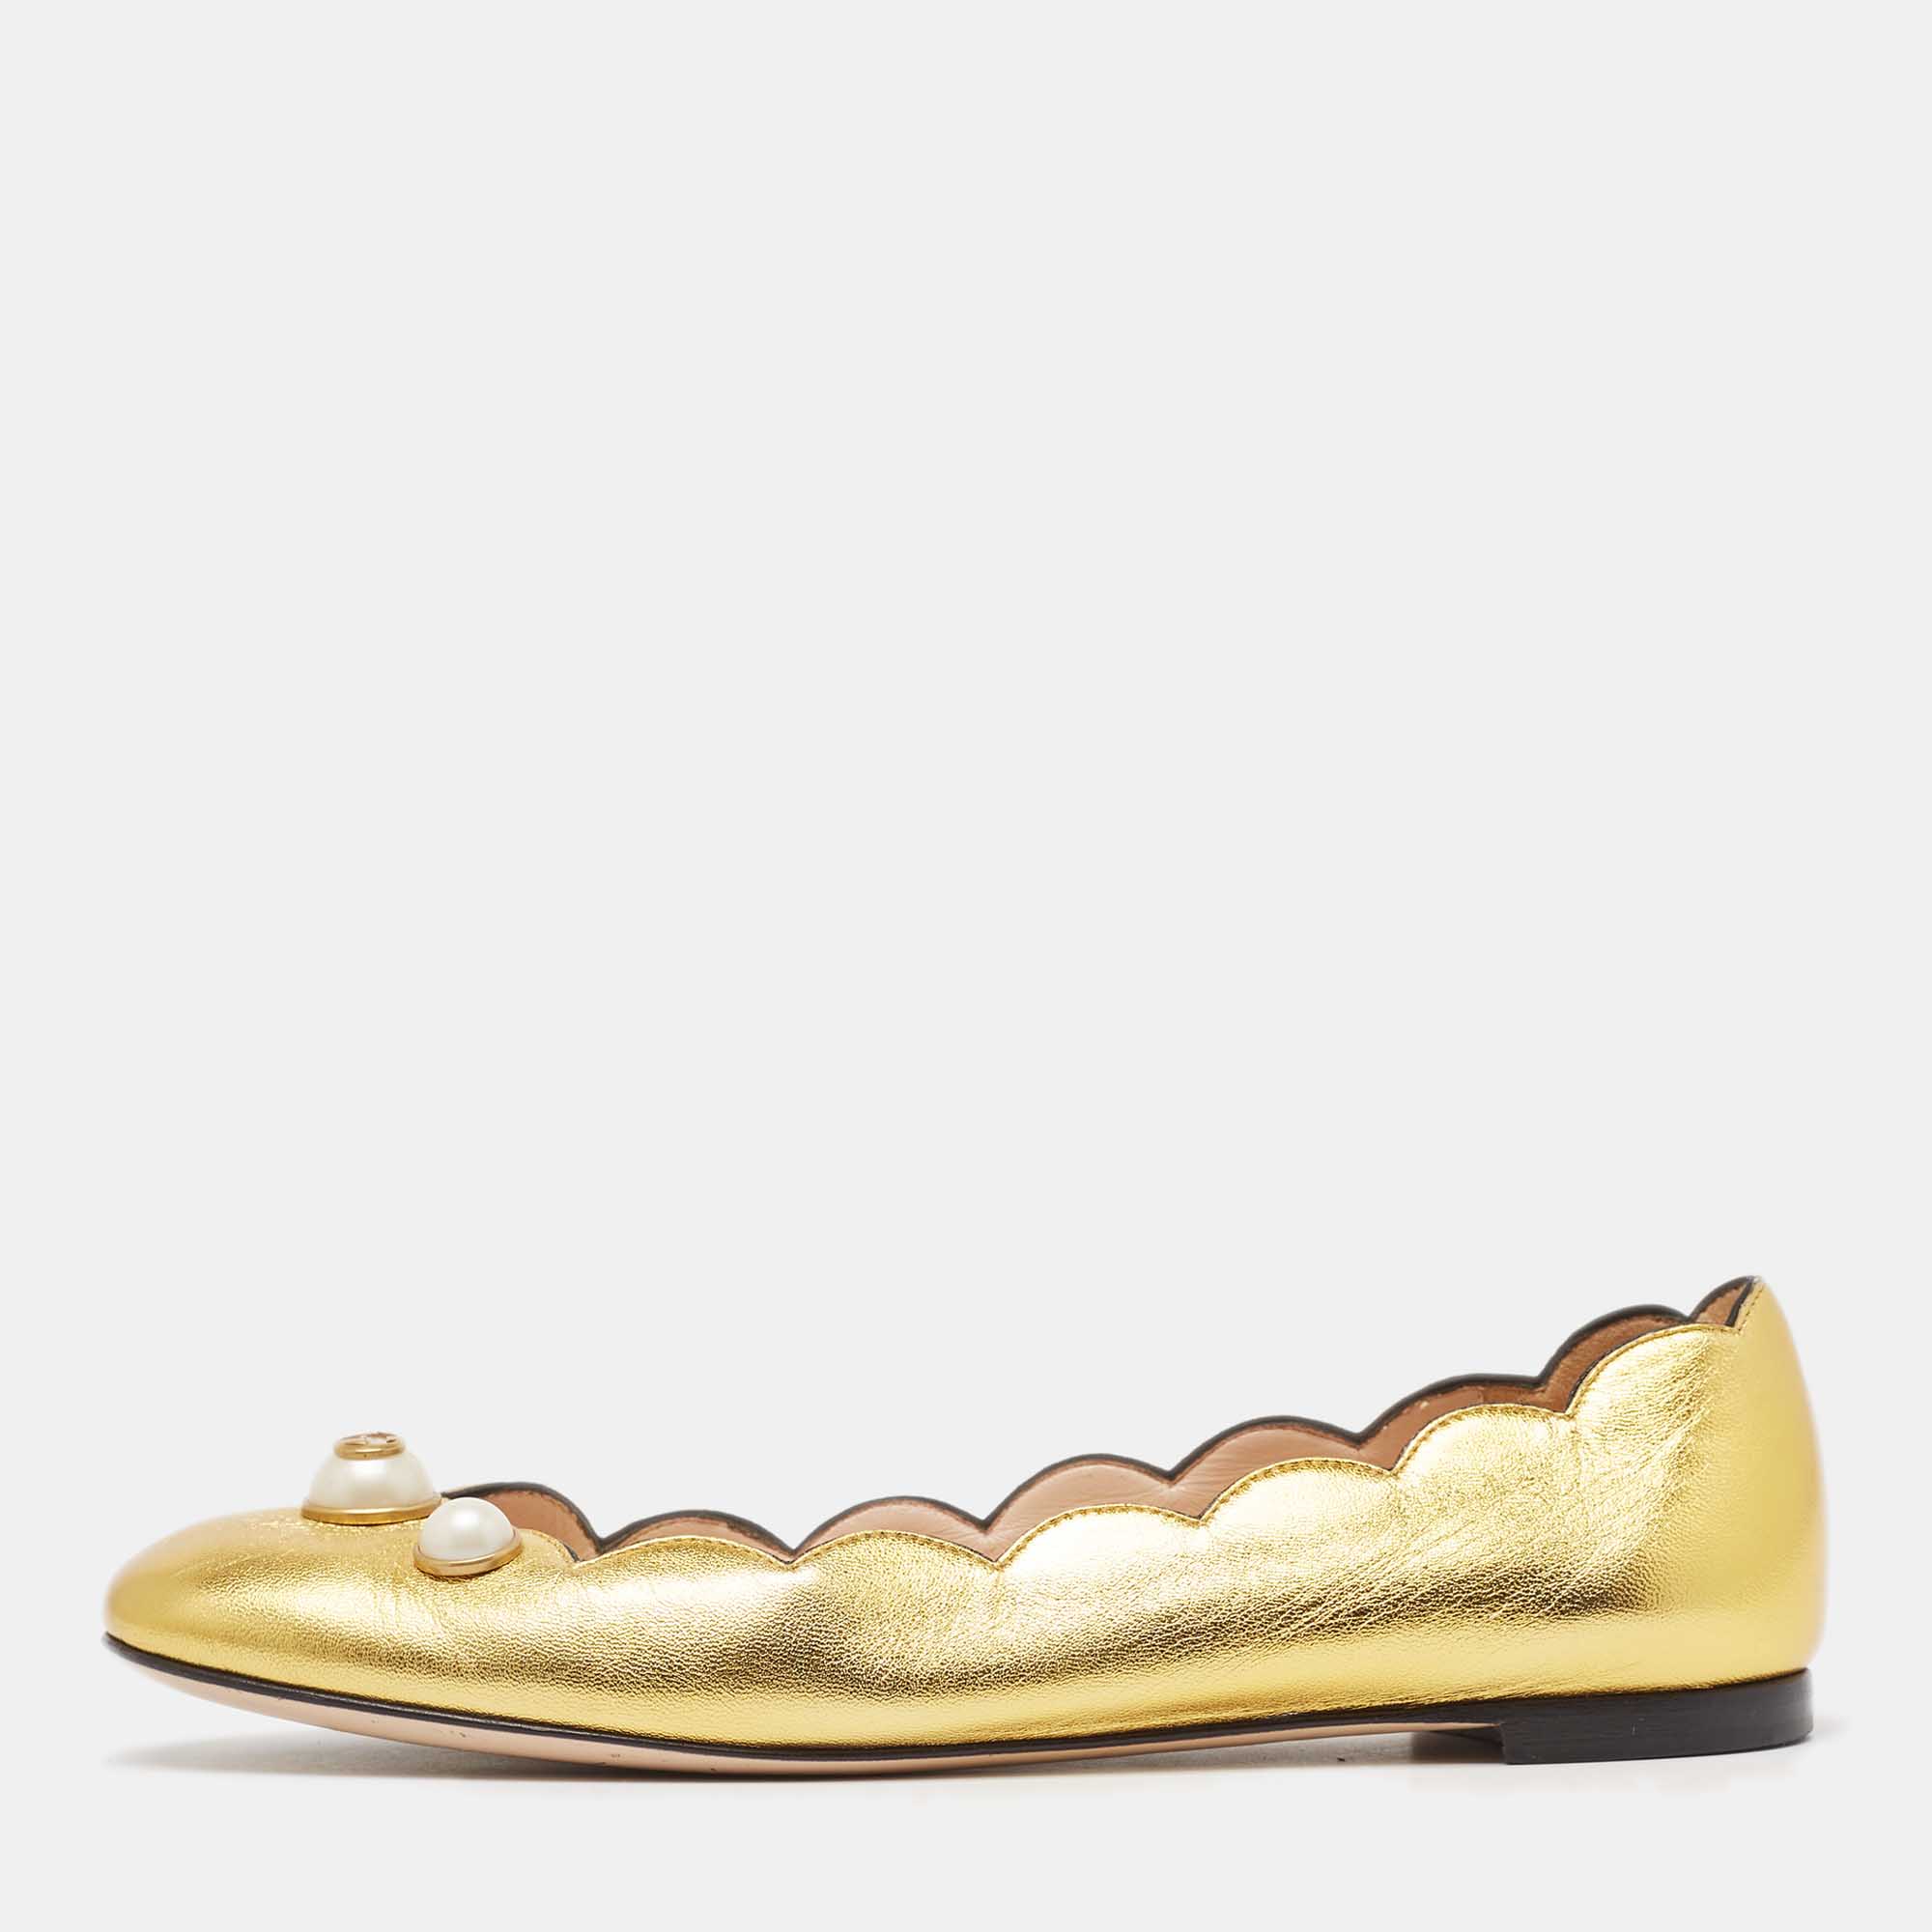 Gucci gold scalloped leather interlocking g faux pearl ballet flats size 36